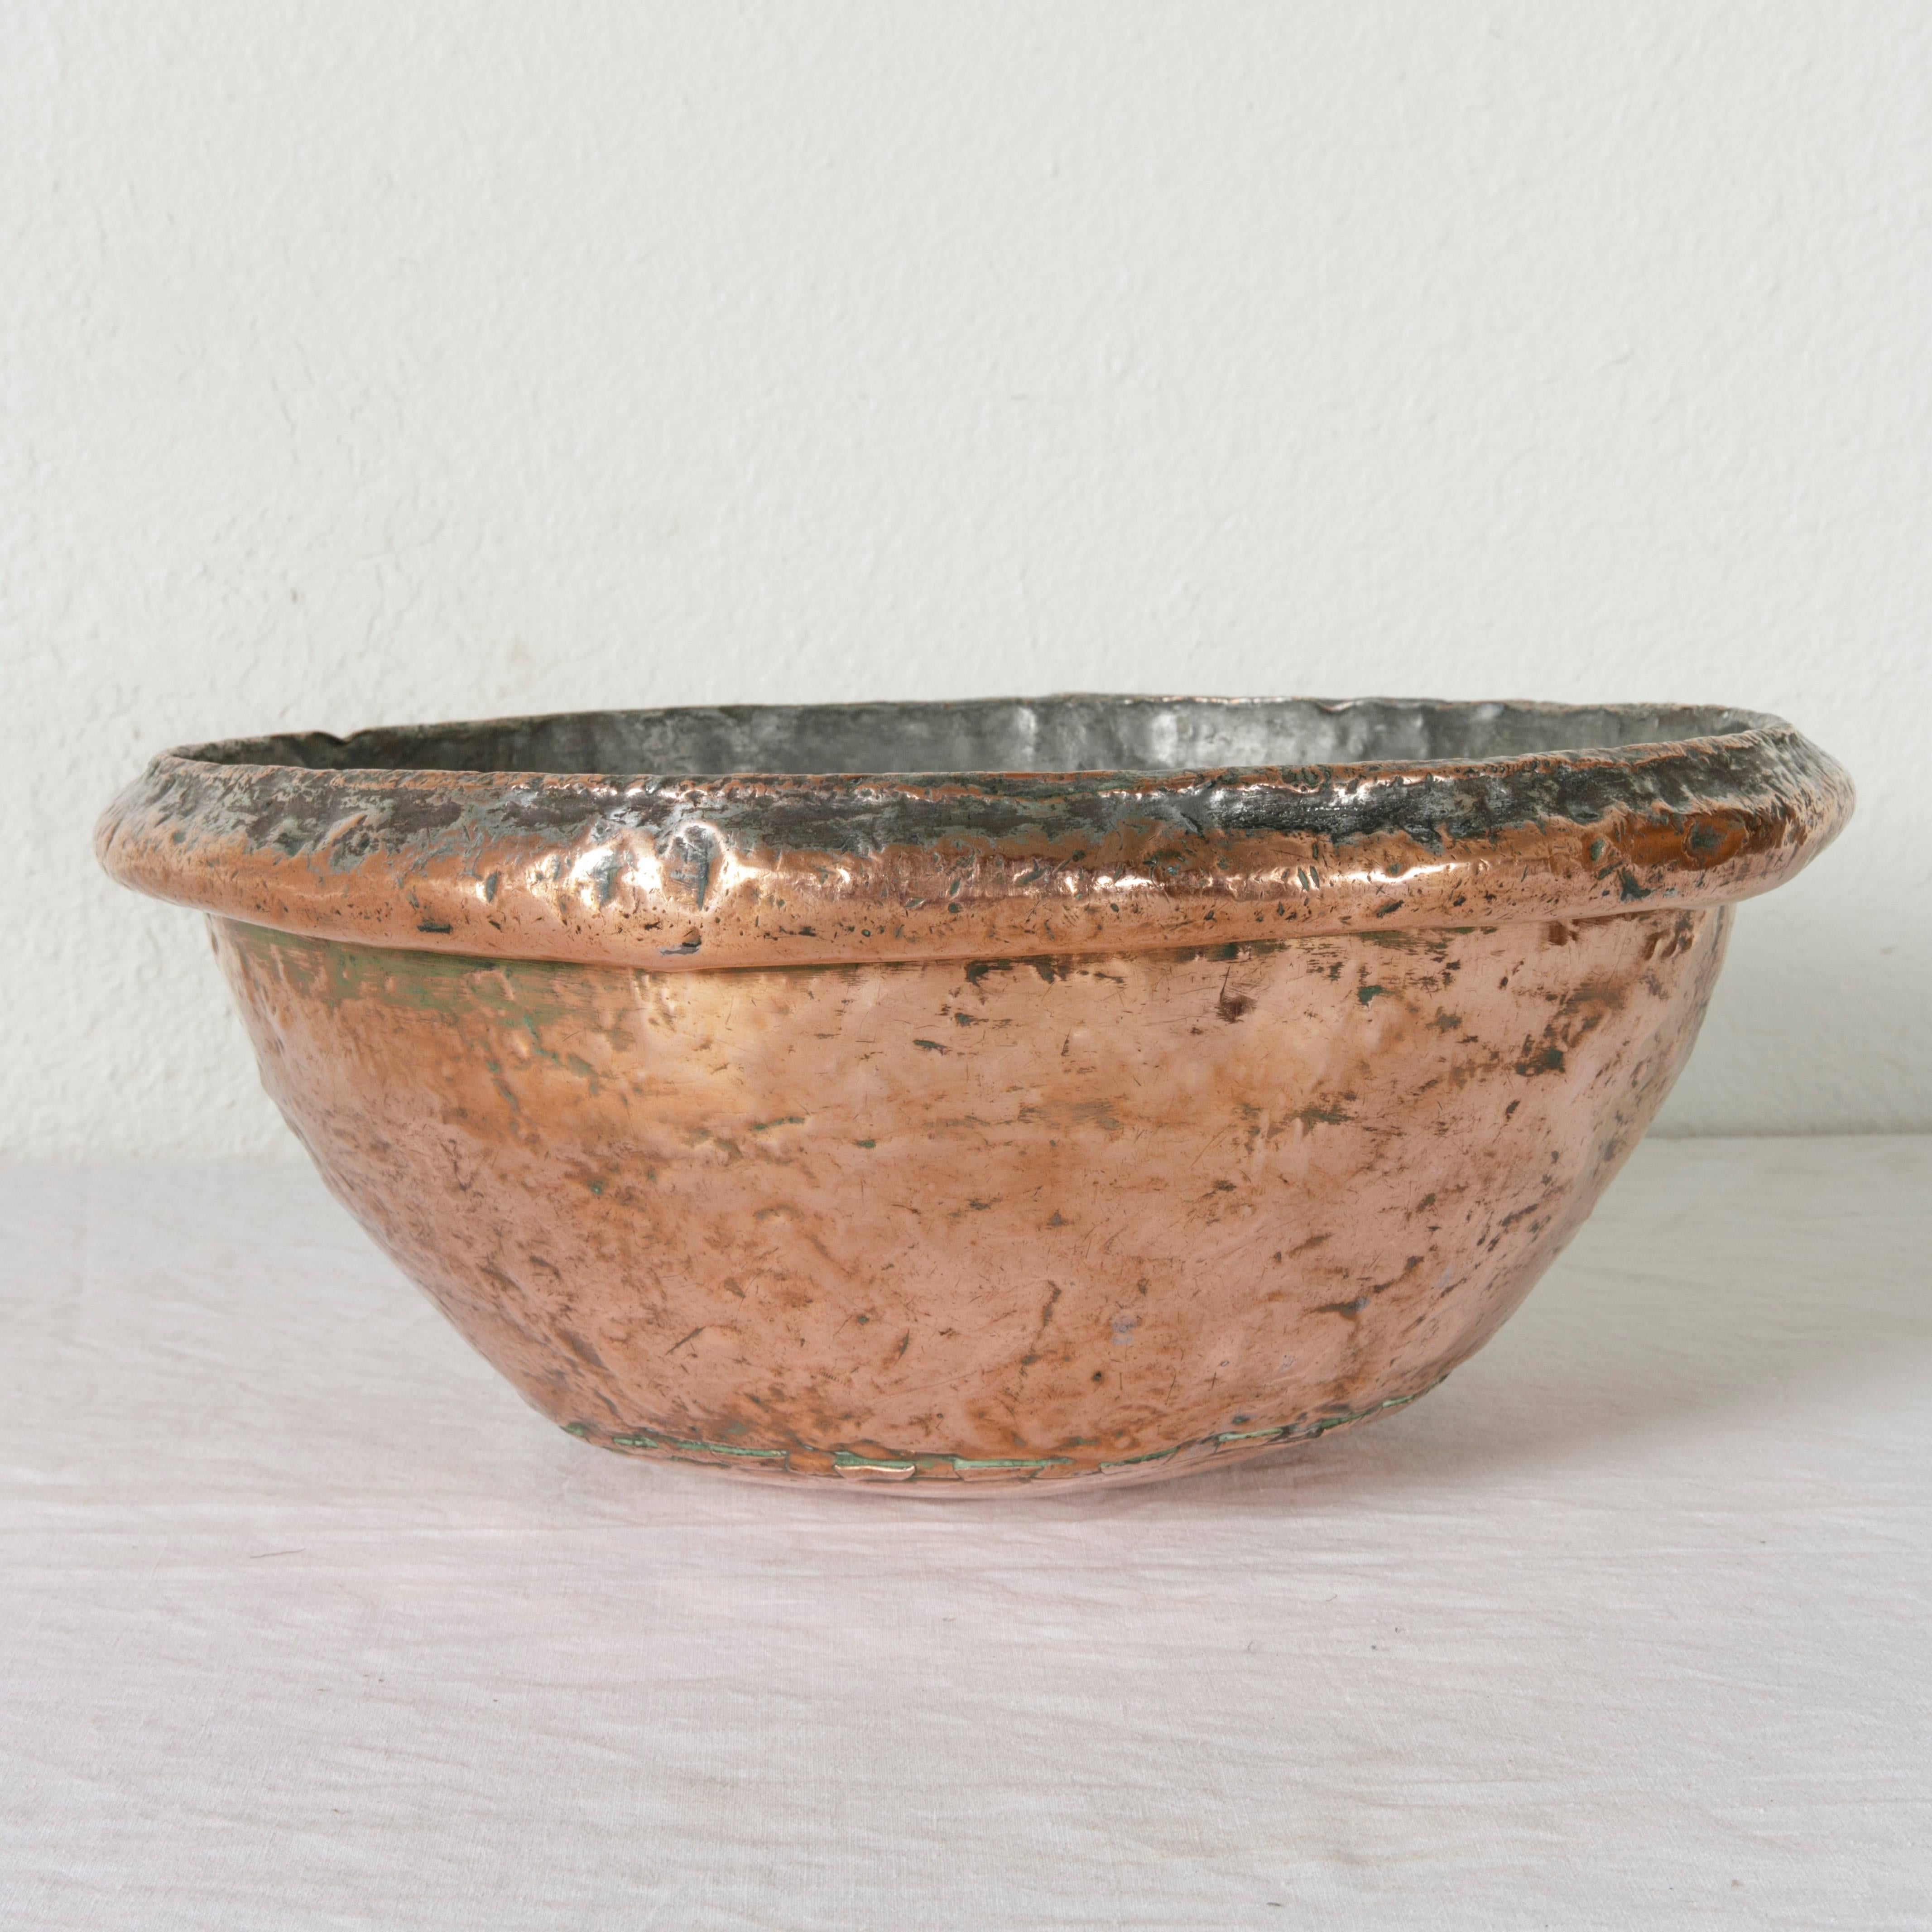 18th Century and Earlier 18th Century French Hand-Hammered Copper Mixing Bowl with Iron Ring for Hanging